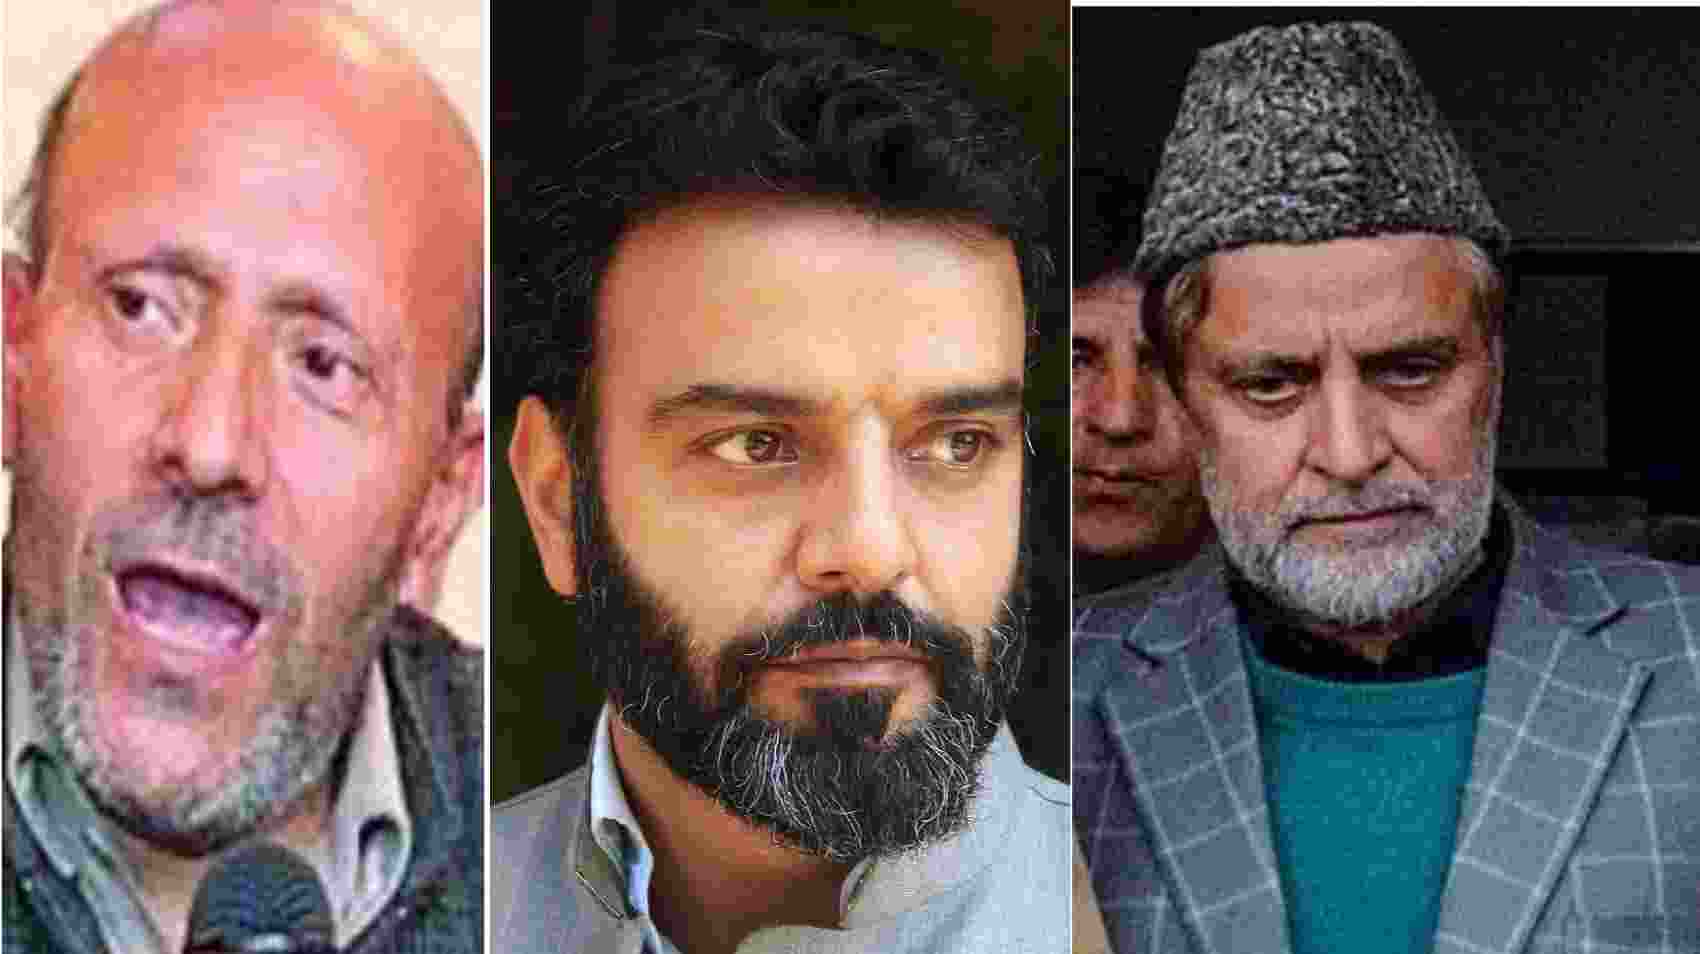 Omar Abdullah was defeated by jailed candidate Engineer Rashid, Mufti lost to formidable opponent Mian Altaf in the Anantnag-Rajouri constituency and Aga Syed Ruhullah Mehdi of the NC won the Srinagar Lok Sabha seat with an impressive 3.56 lakh votes, maintaining a commanding margin of 1.88 lakh votes over his opponent, Waheed Parra of the PDP.   